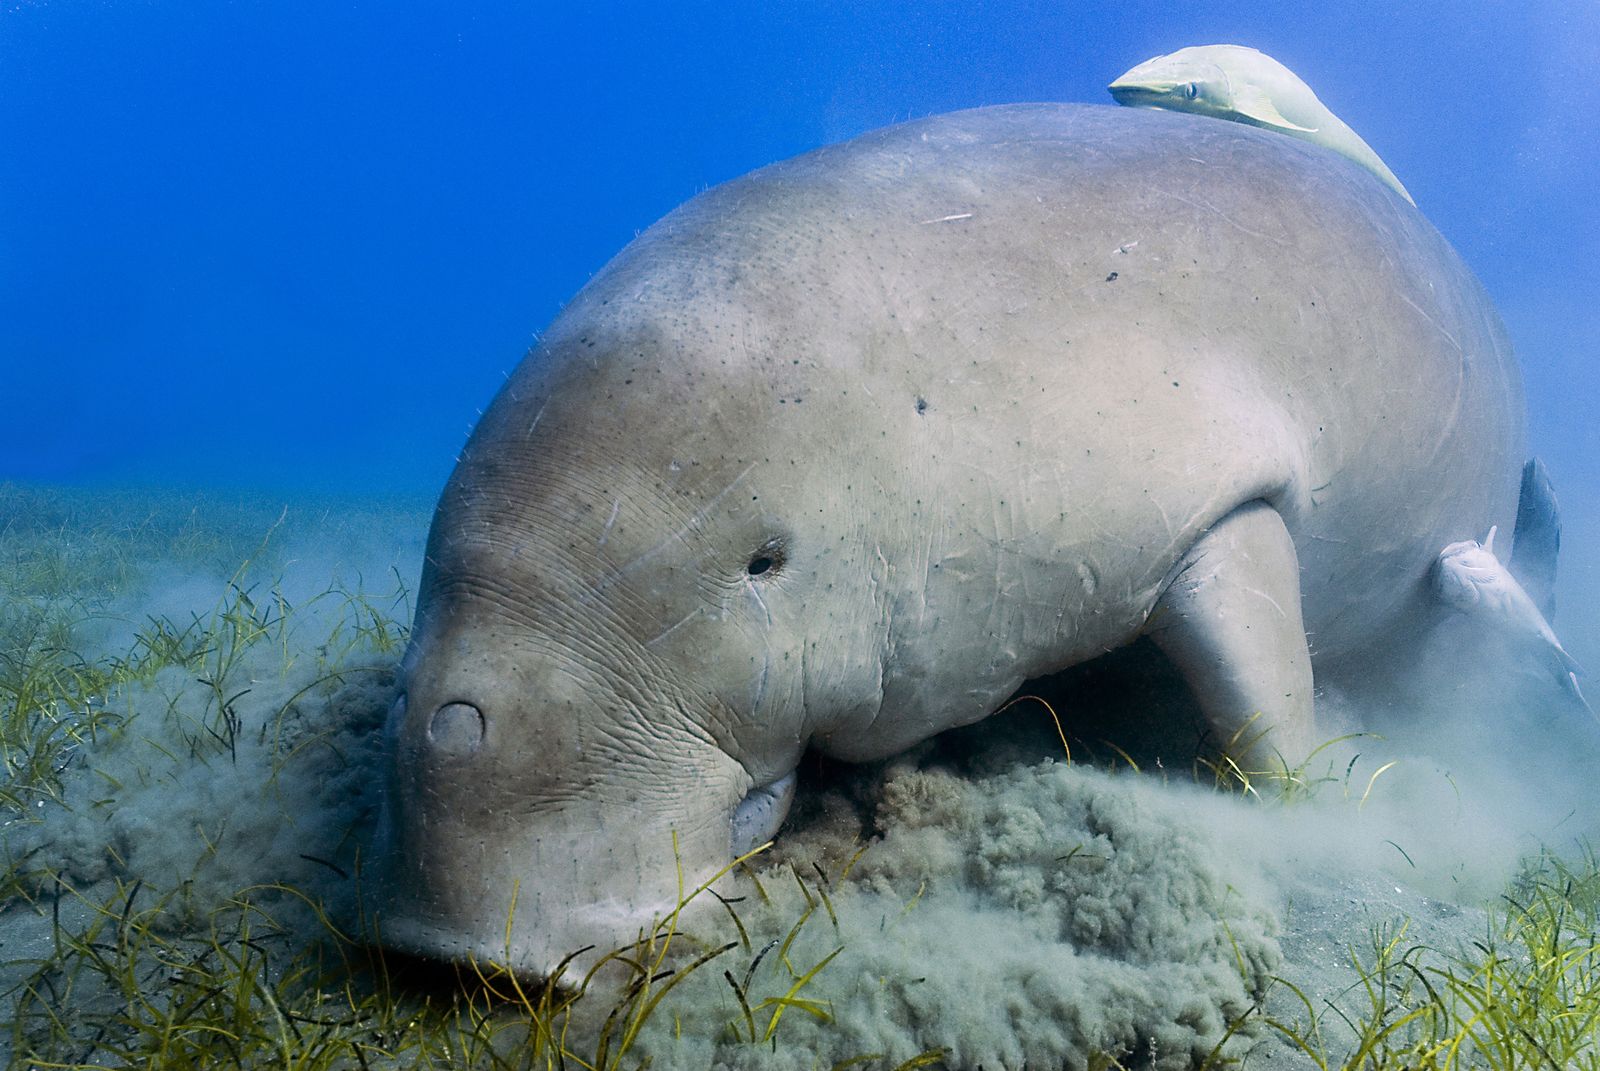 Dugong Populations Are Declining in the Great Barrier Reef, Study Finds